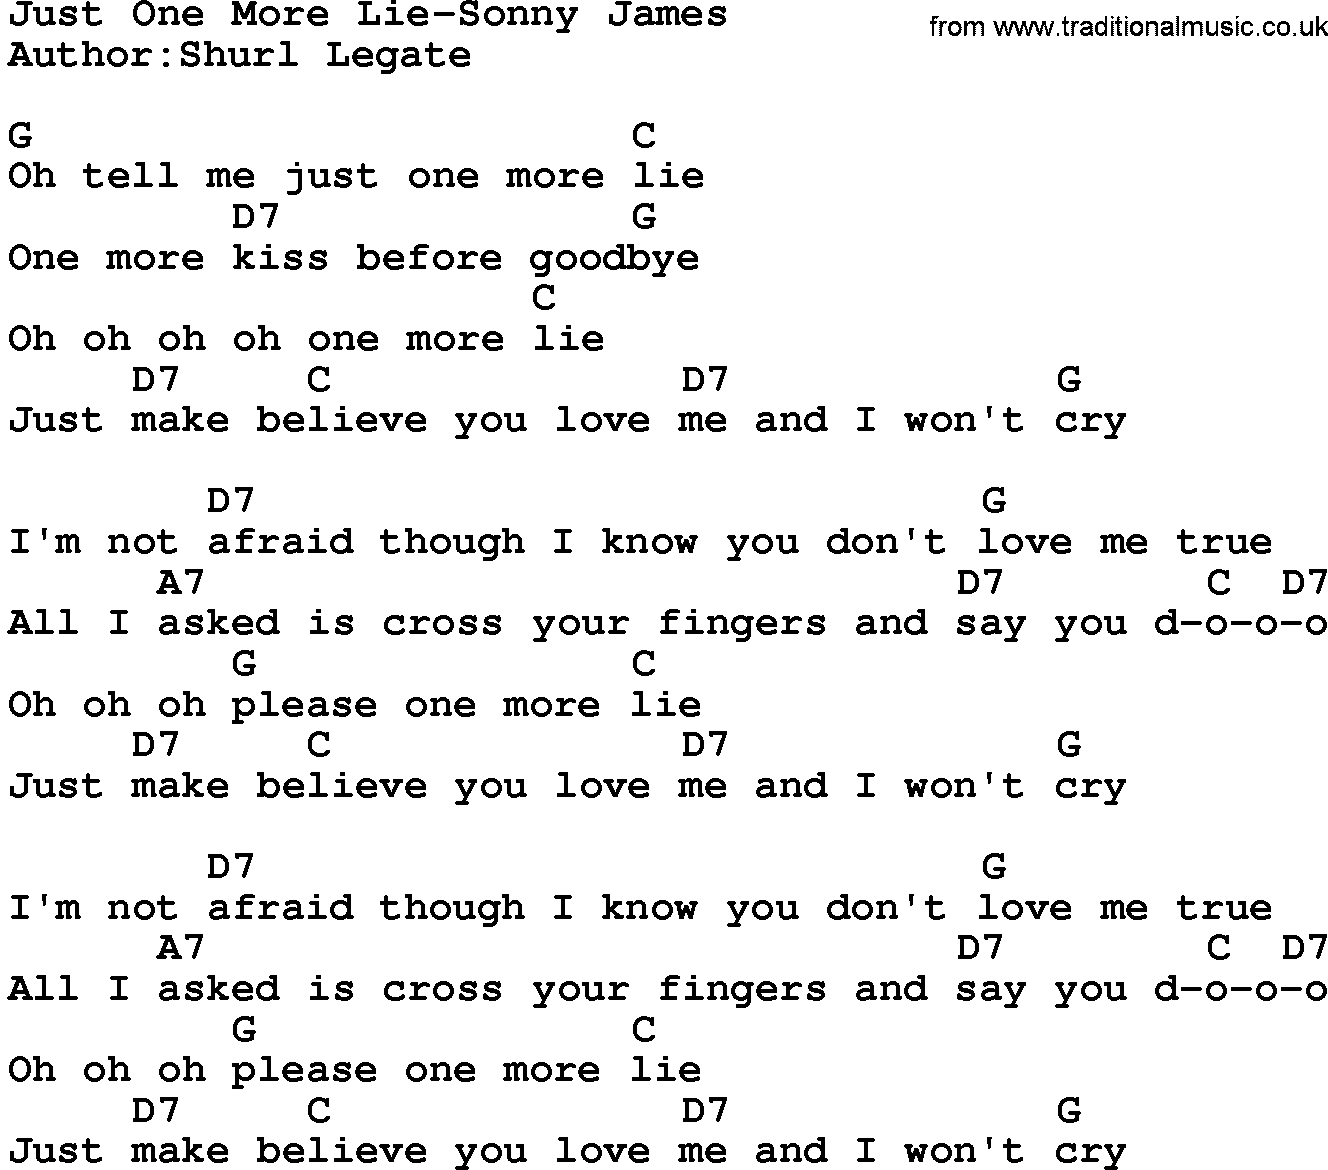 Country music song: Just One More Lie-Sonny James lyrics and chords